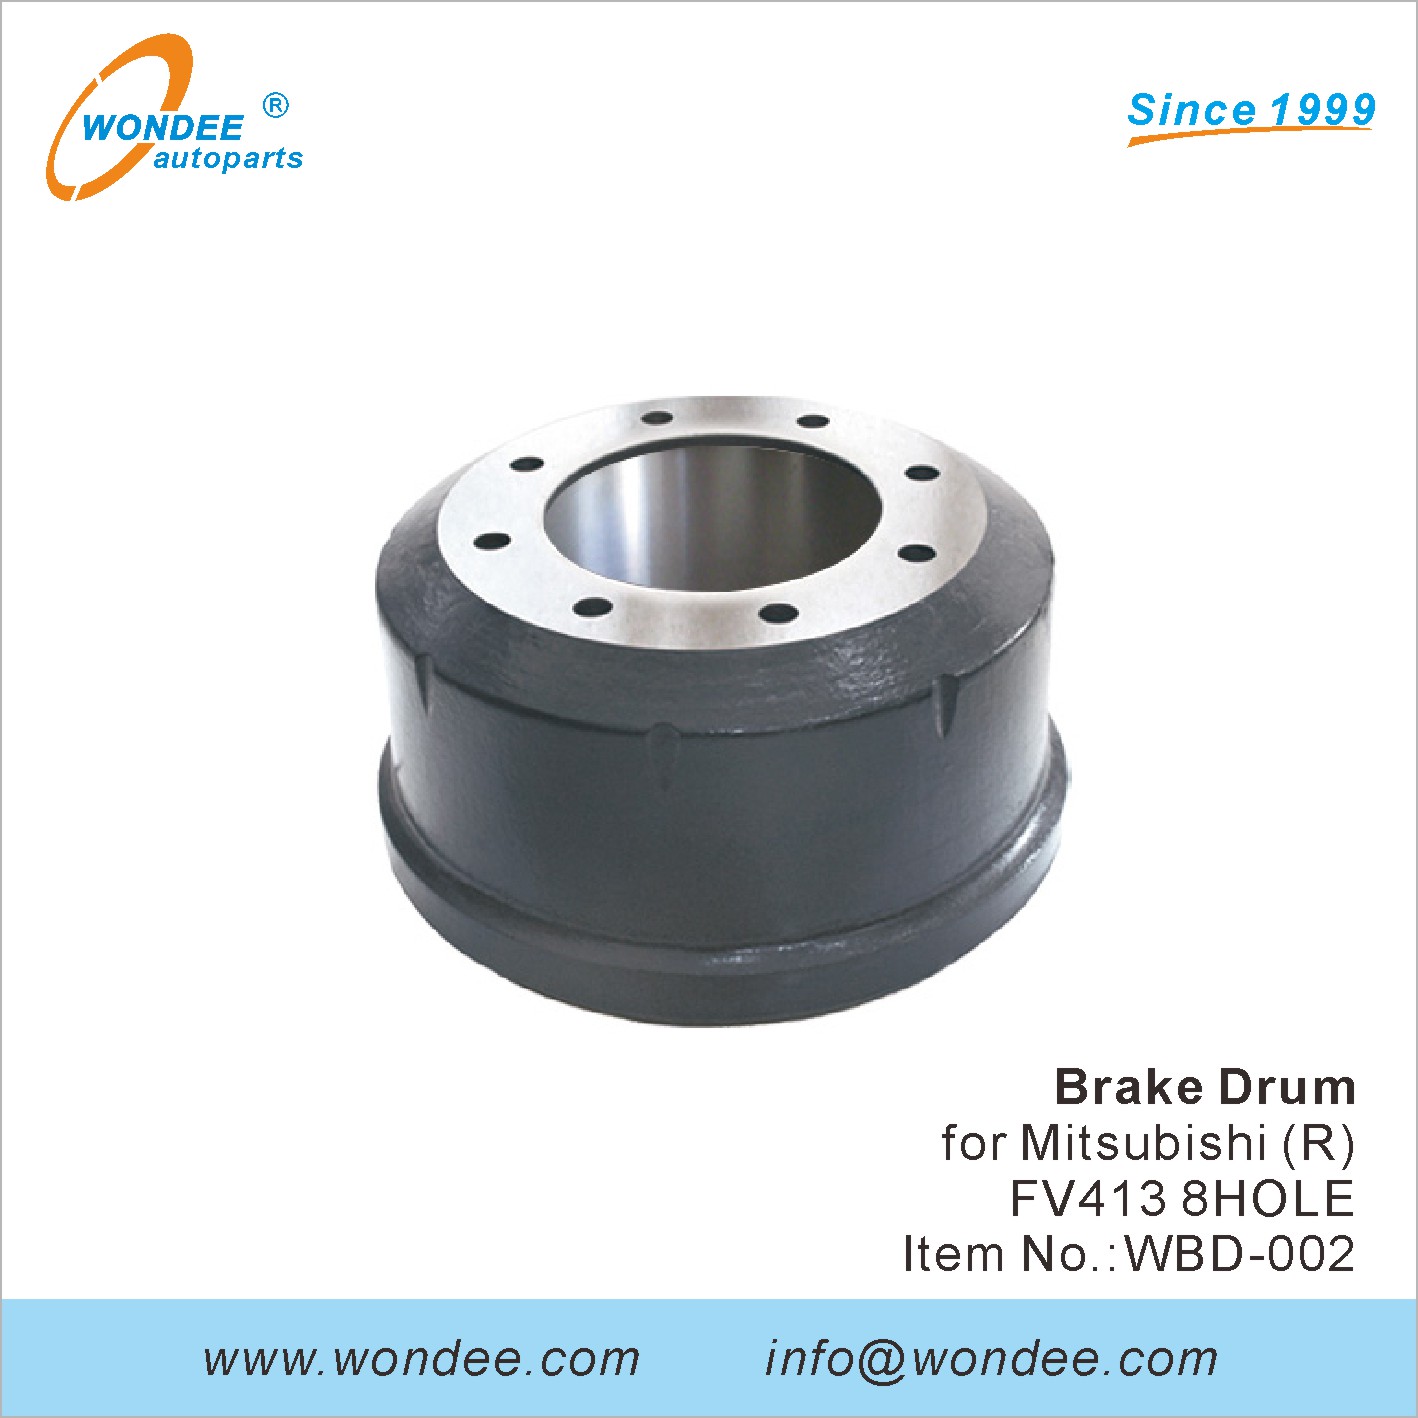 Brake drums for Heavy Duty Trucks and Trailers